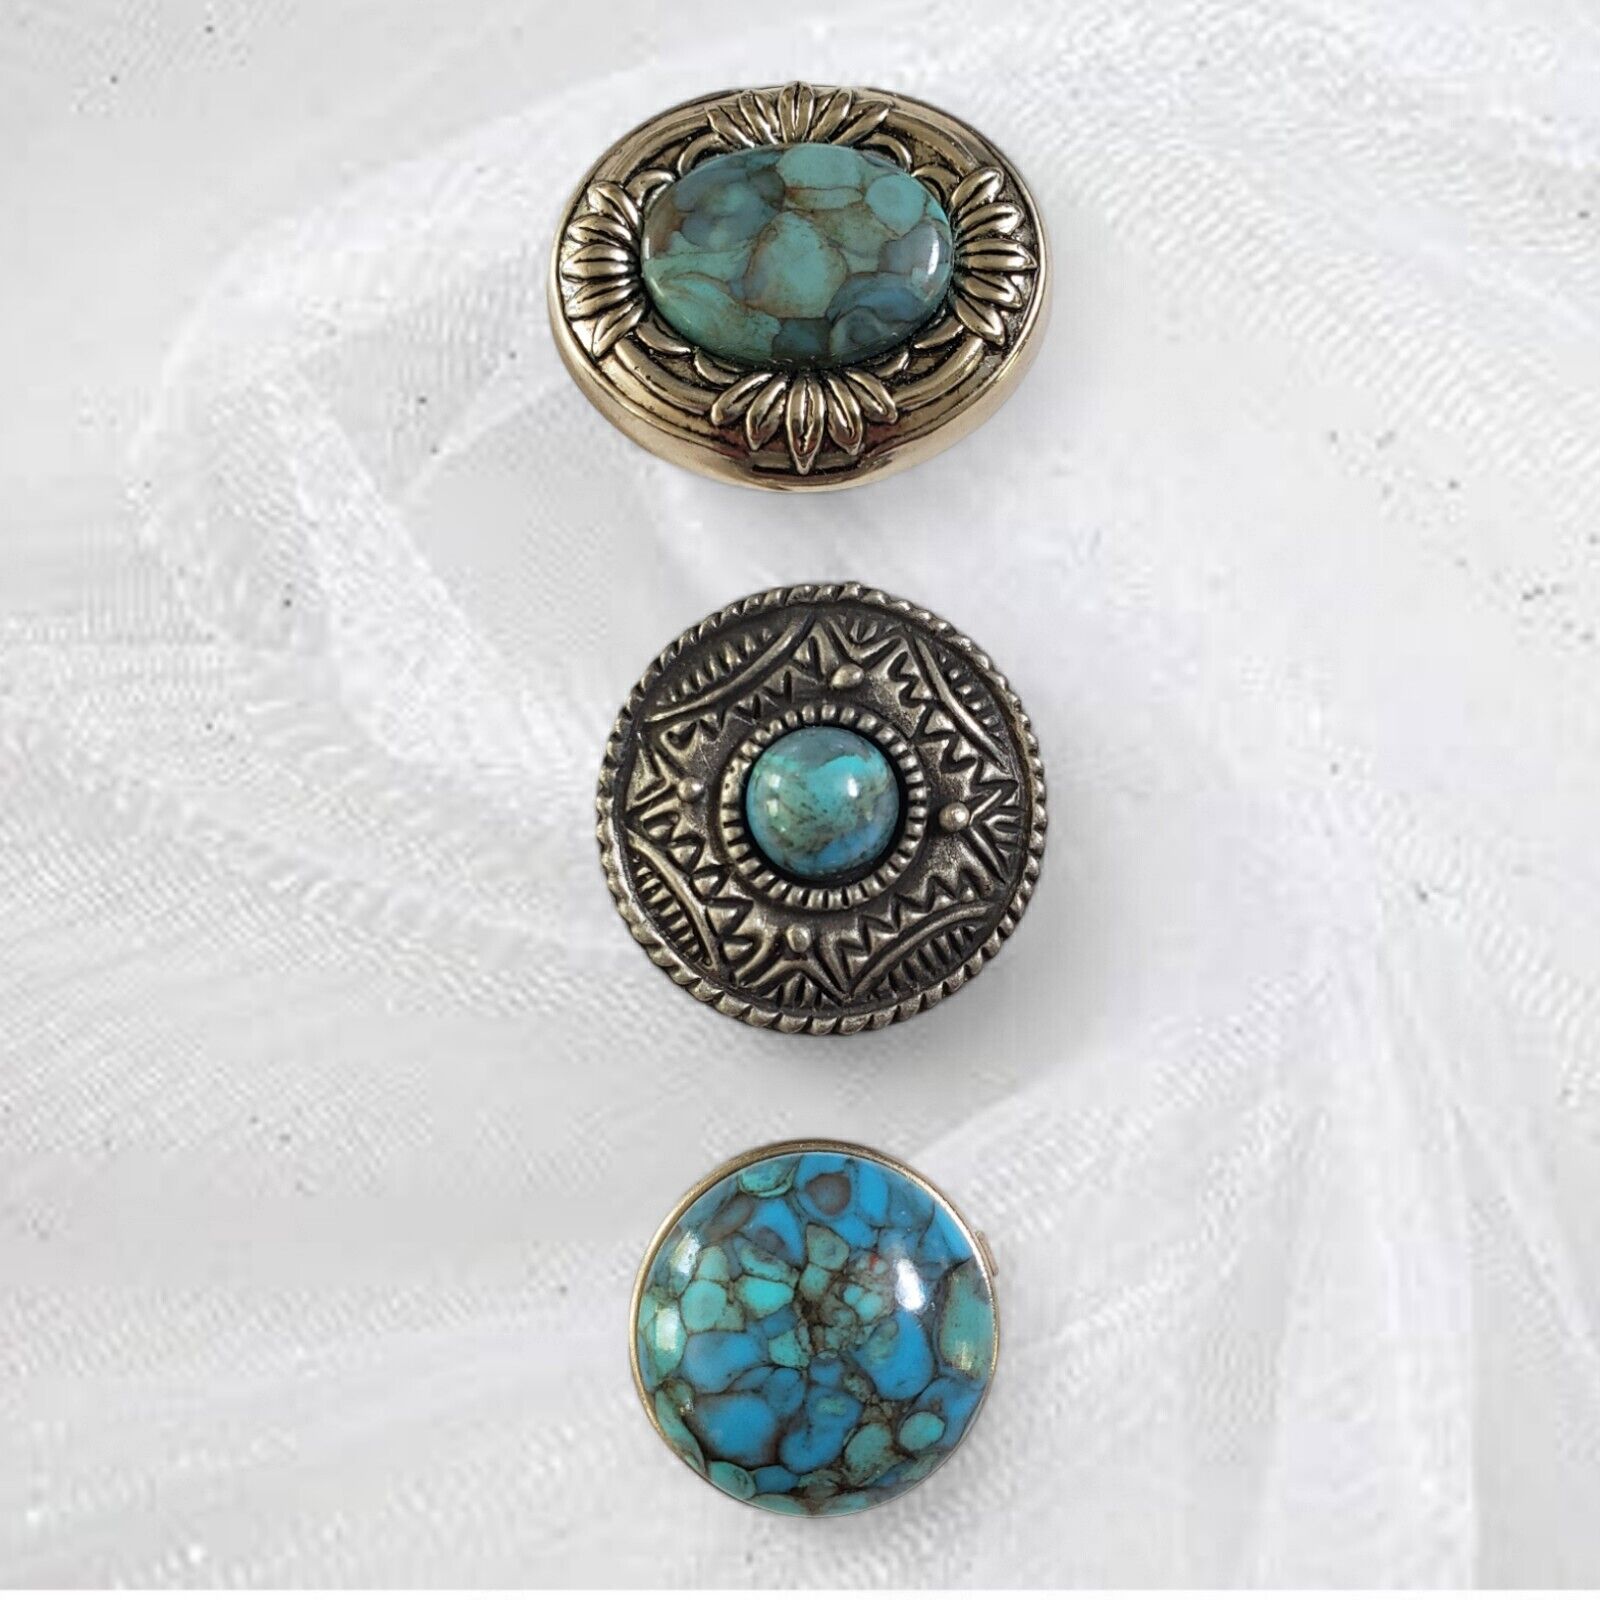 Vintage NONY New York Faux Turquoise Silver Tone Button Covers